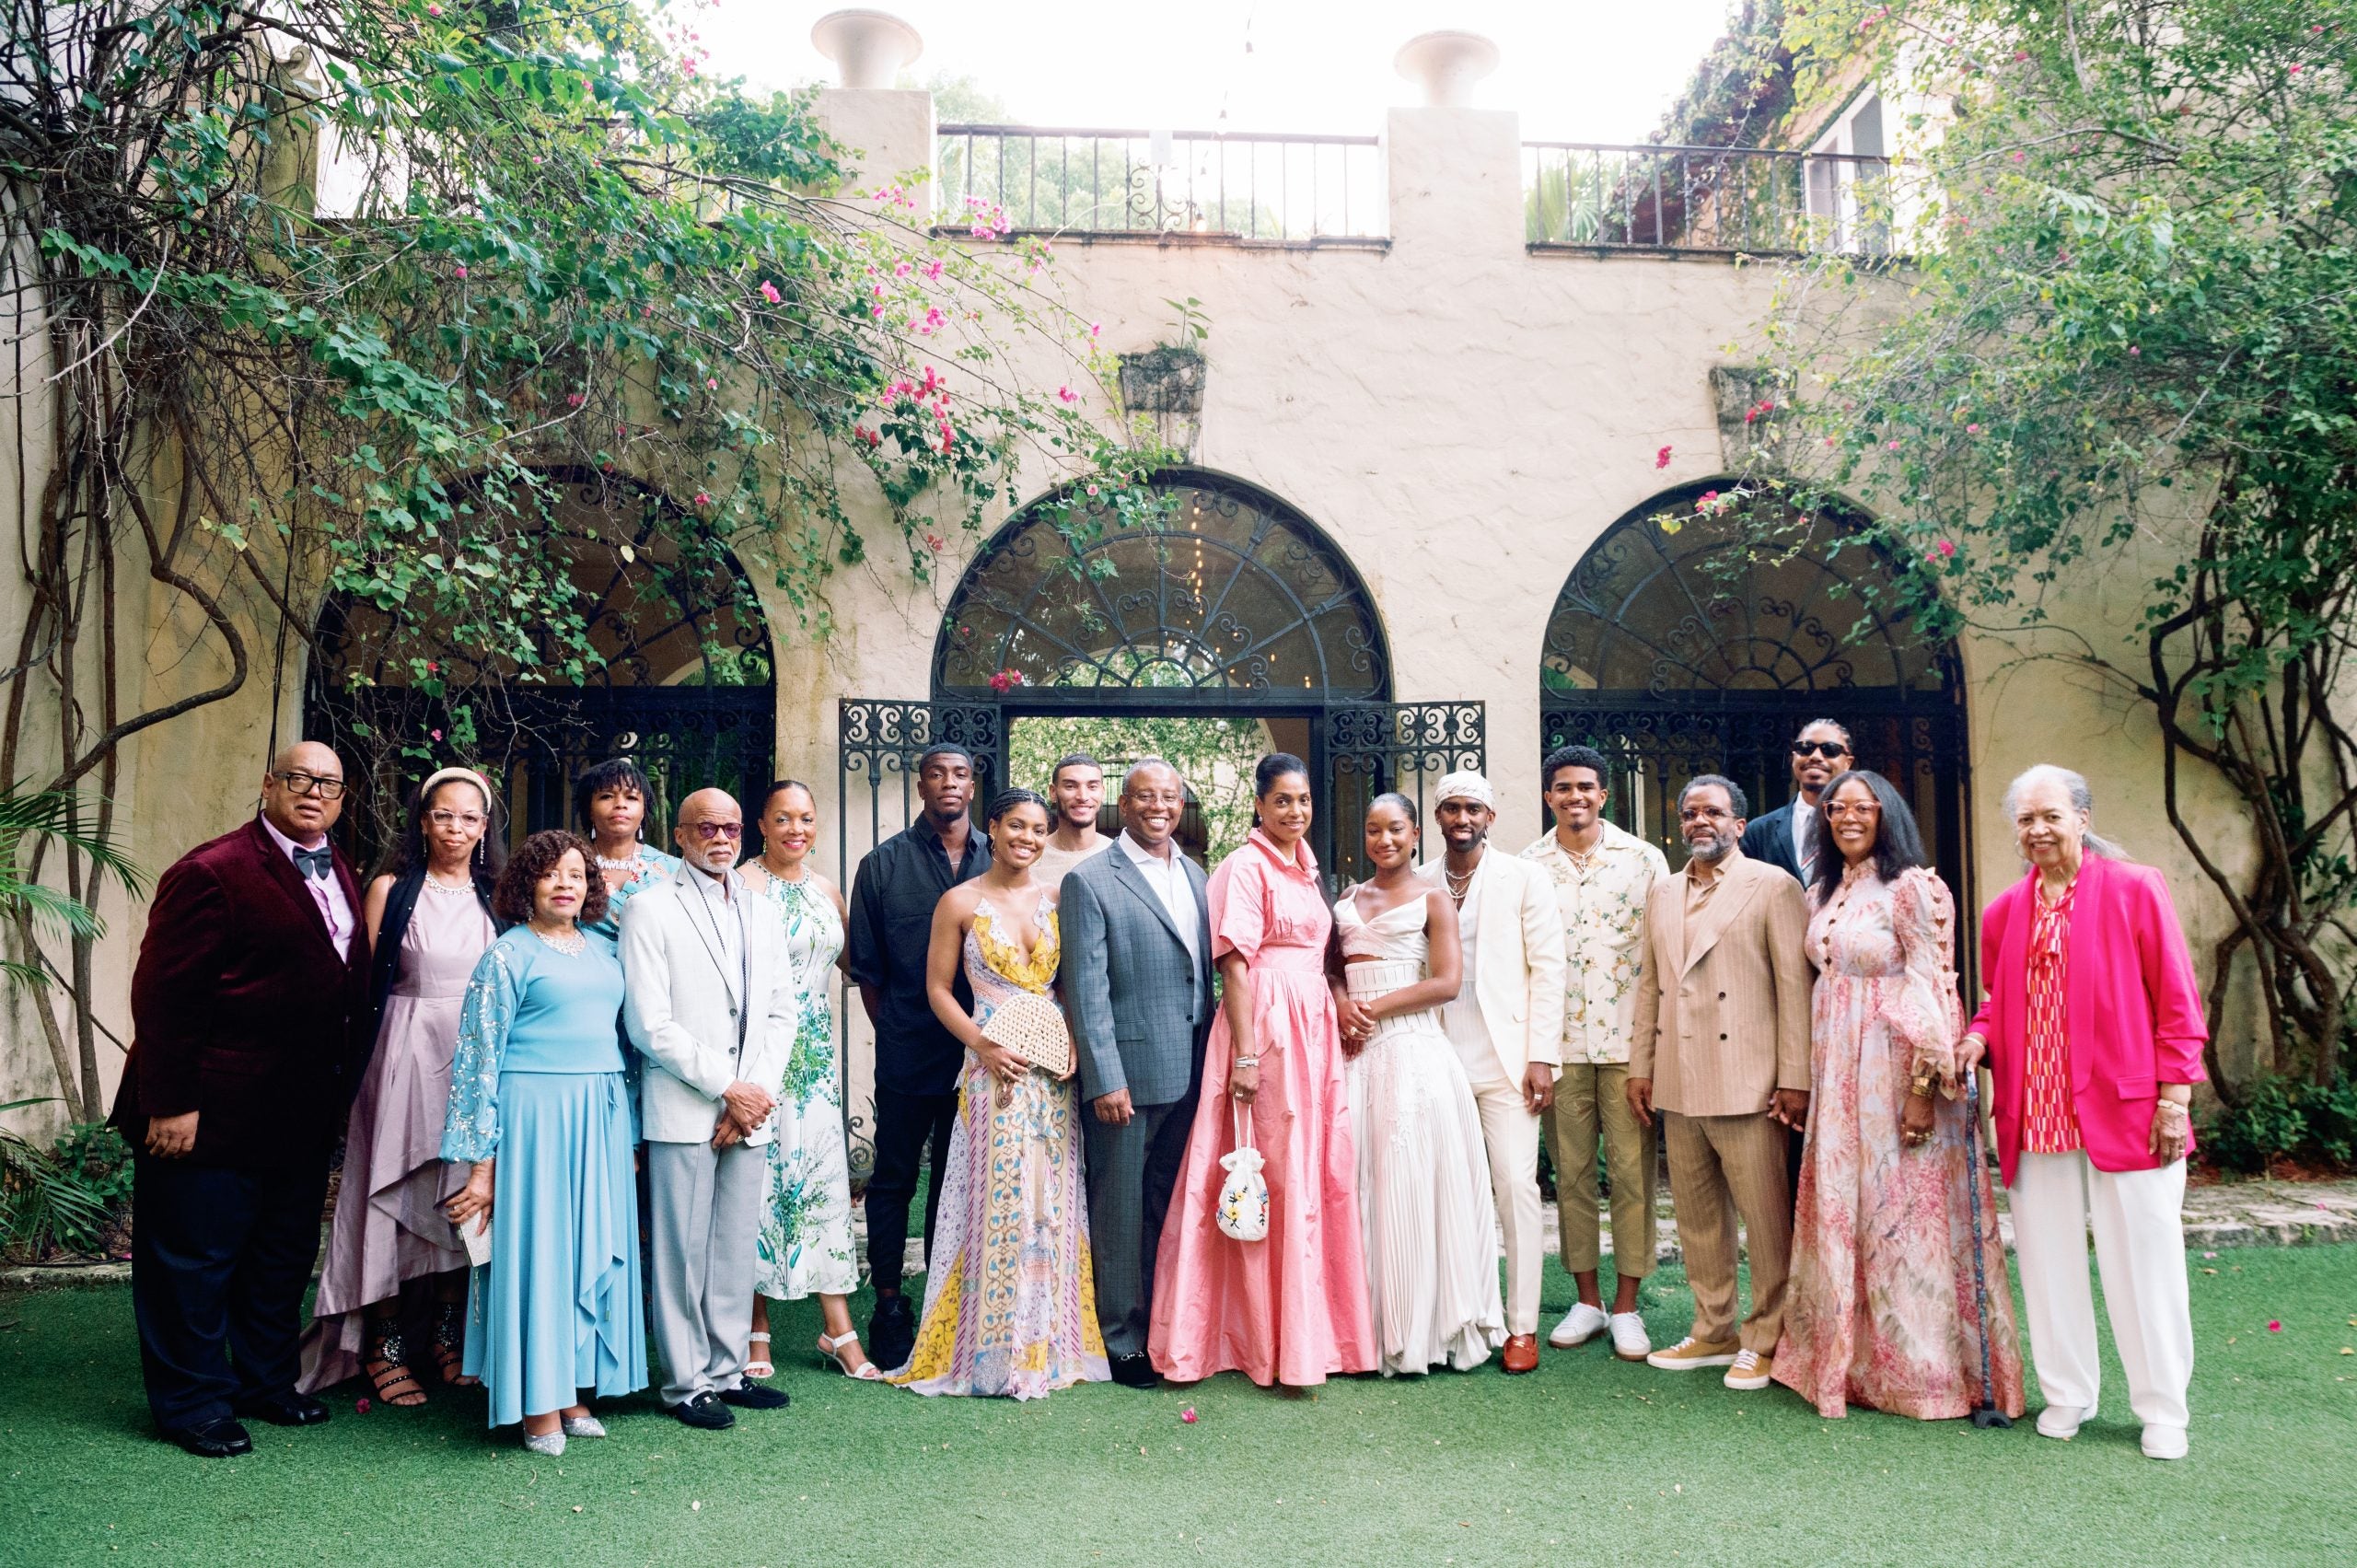 Telsha Anderson-Boone's Nontraditional Wedding Dress Should Be On Your Moodboard ASAP